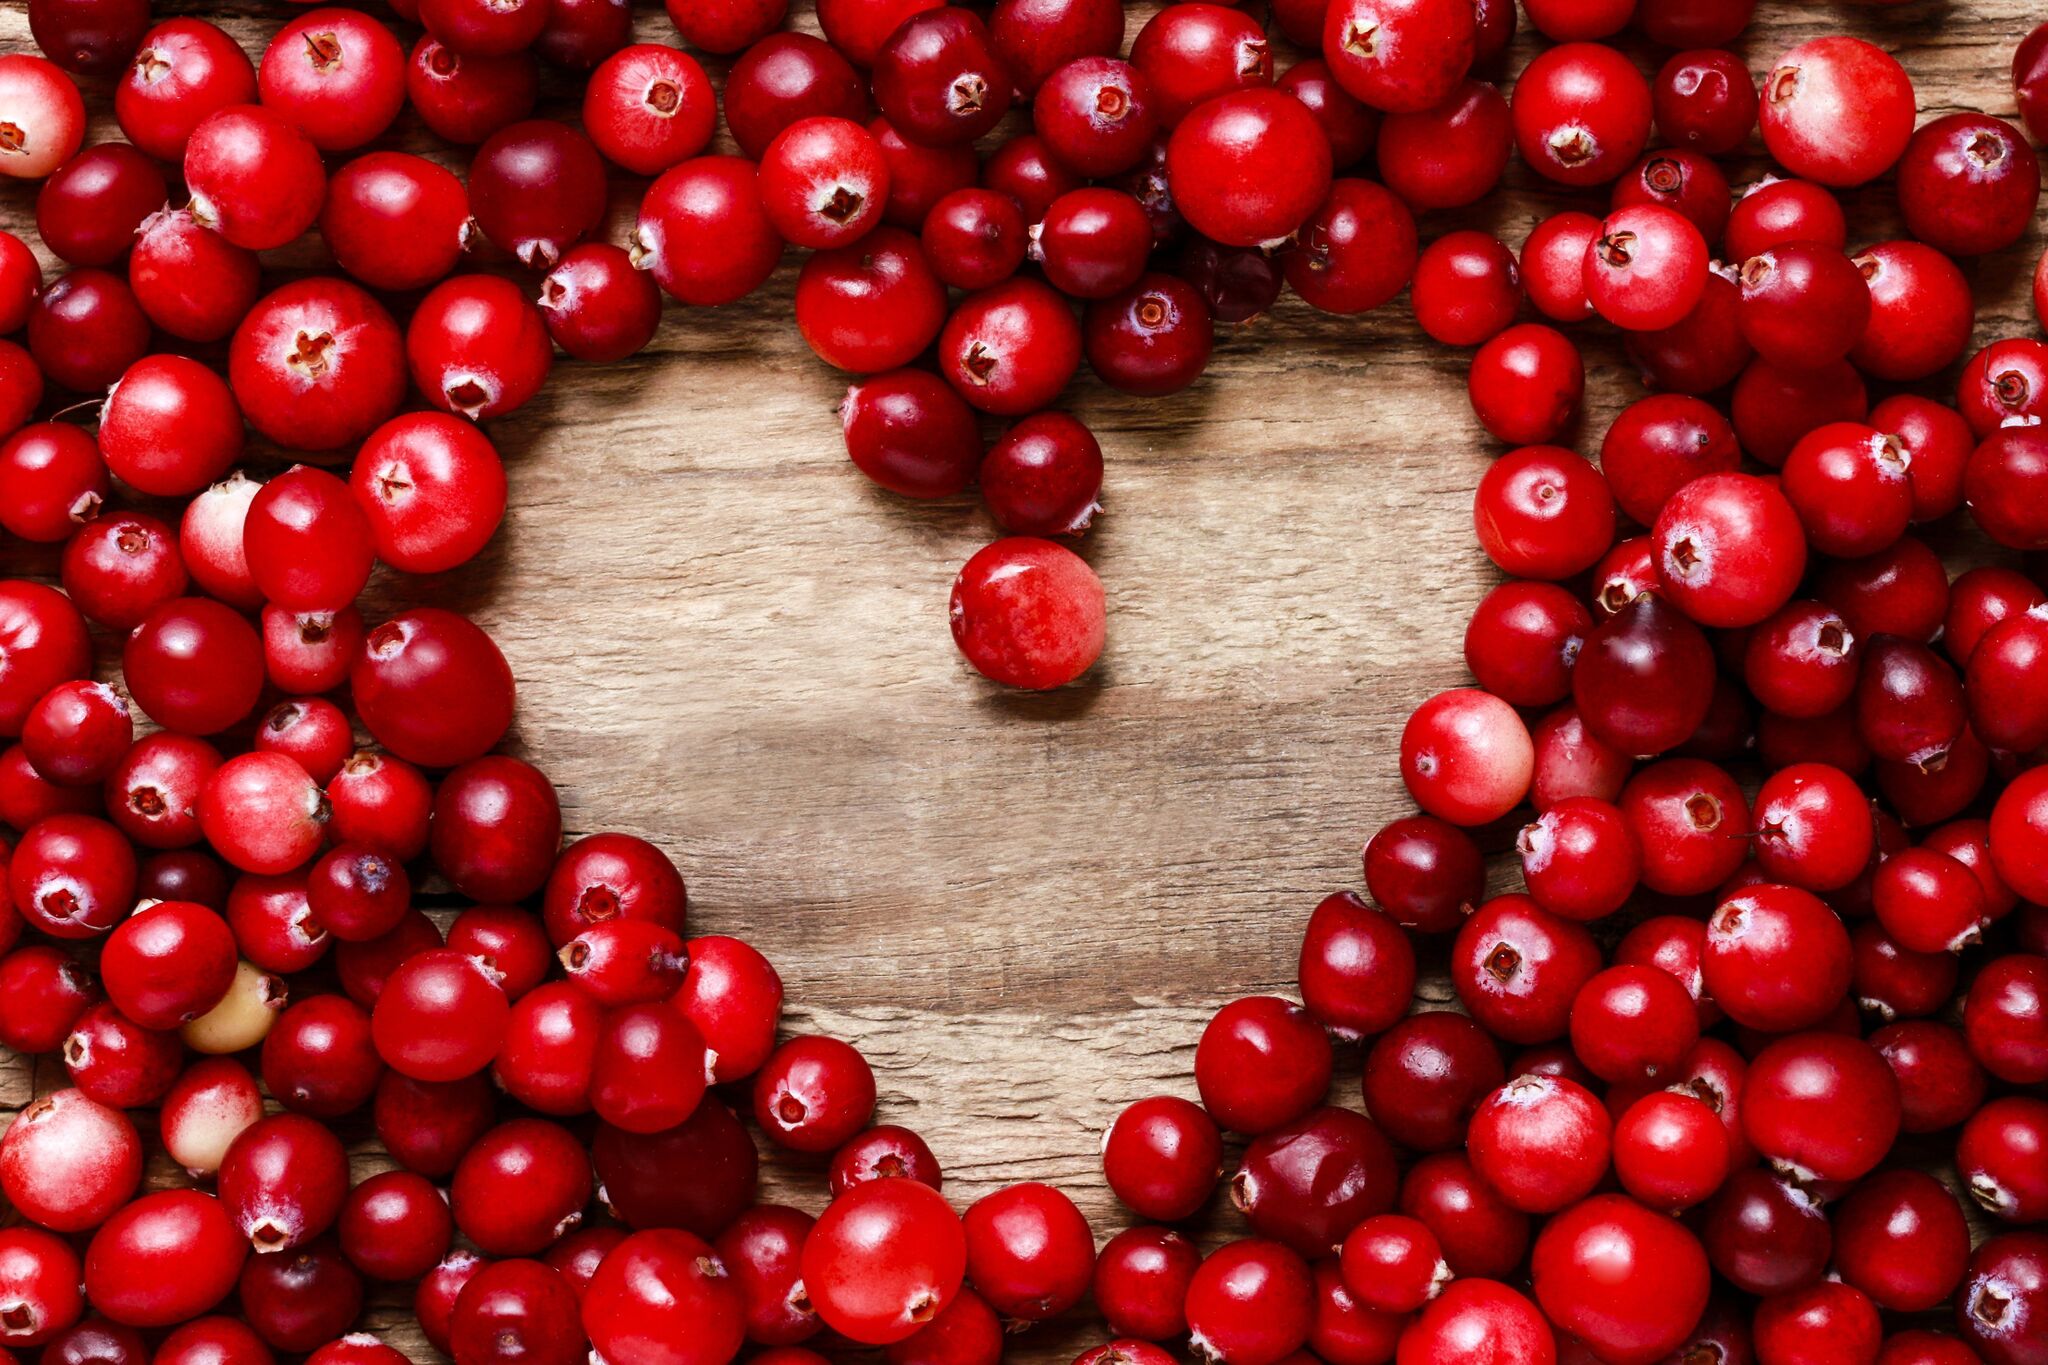 Cranberry Concentrate: The Final Answer to Preventing Painful, Dangerous UTIs